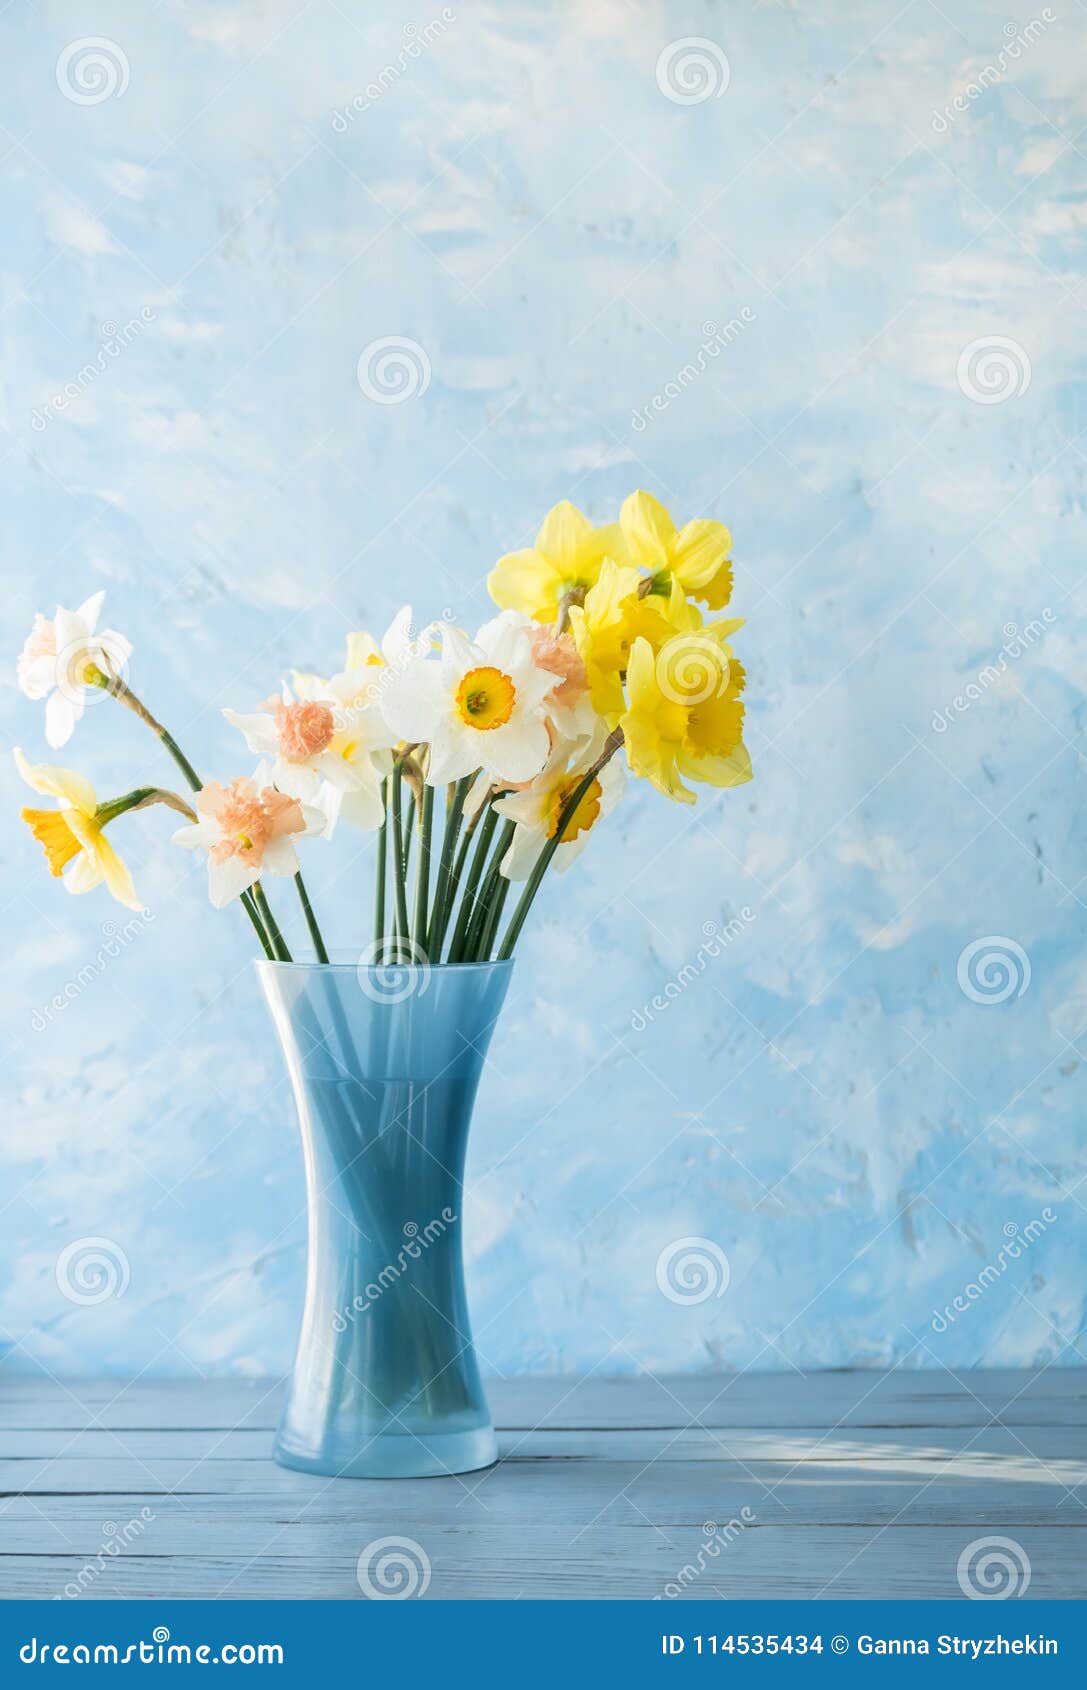 Flowers of Daffodils of Different Kinds in a Blue Vase Stock Photo ...